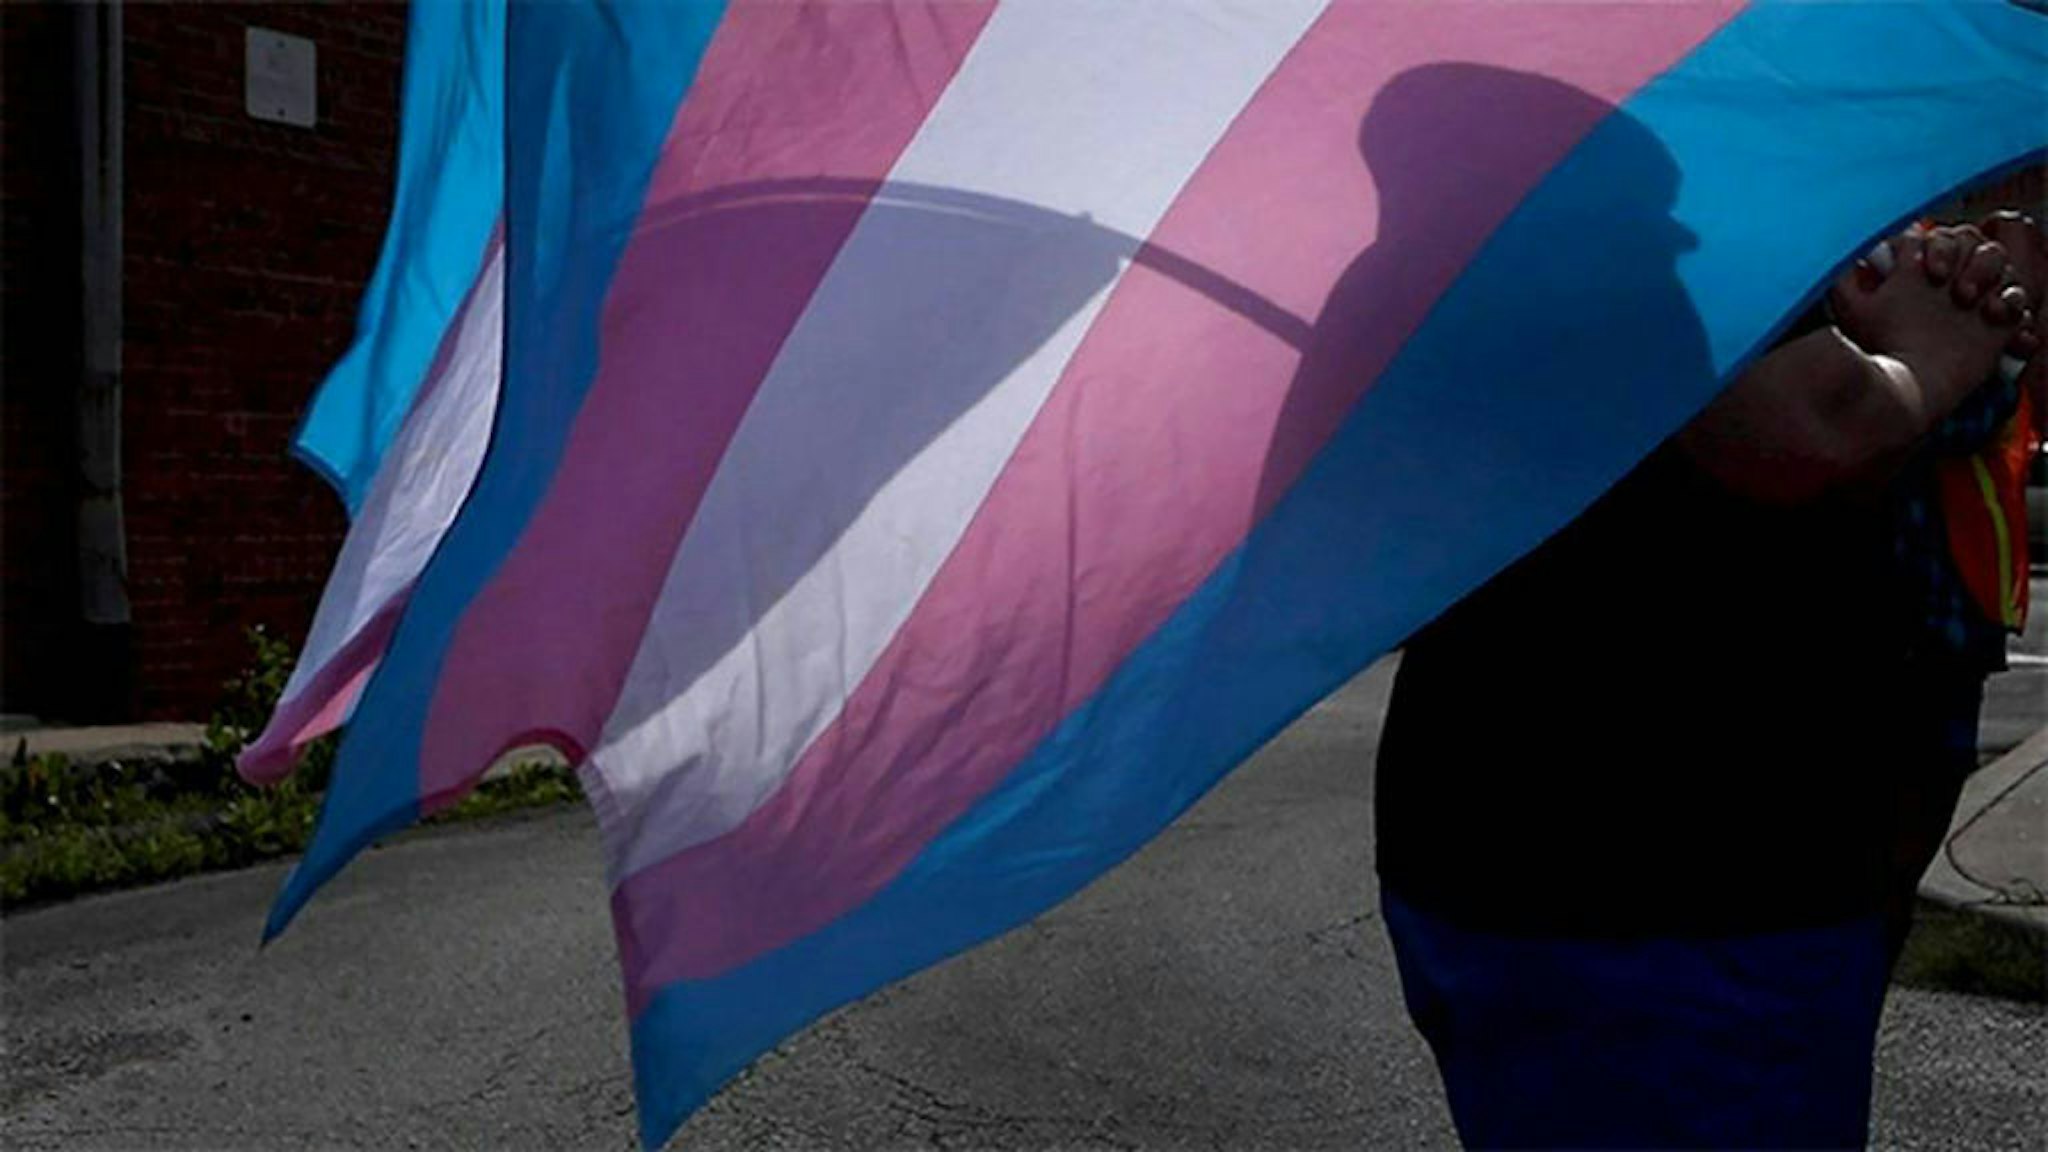 A marcher carries a Transgender Pride flag during a march in Kansas City. Lawmakers in Kansas and Missouri weighing bills that target the LGBTQ community. (The Kansas City Star/Tribune News Service via Getty Images)